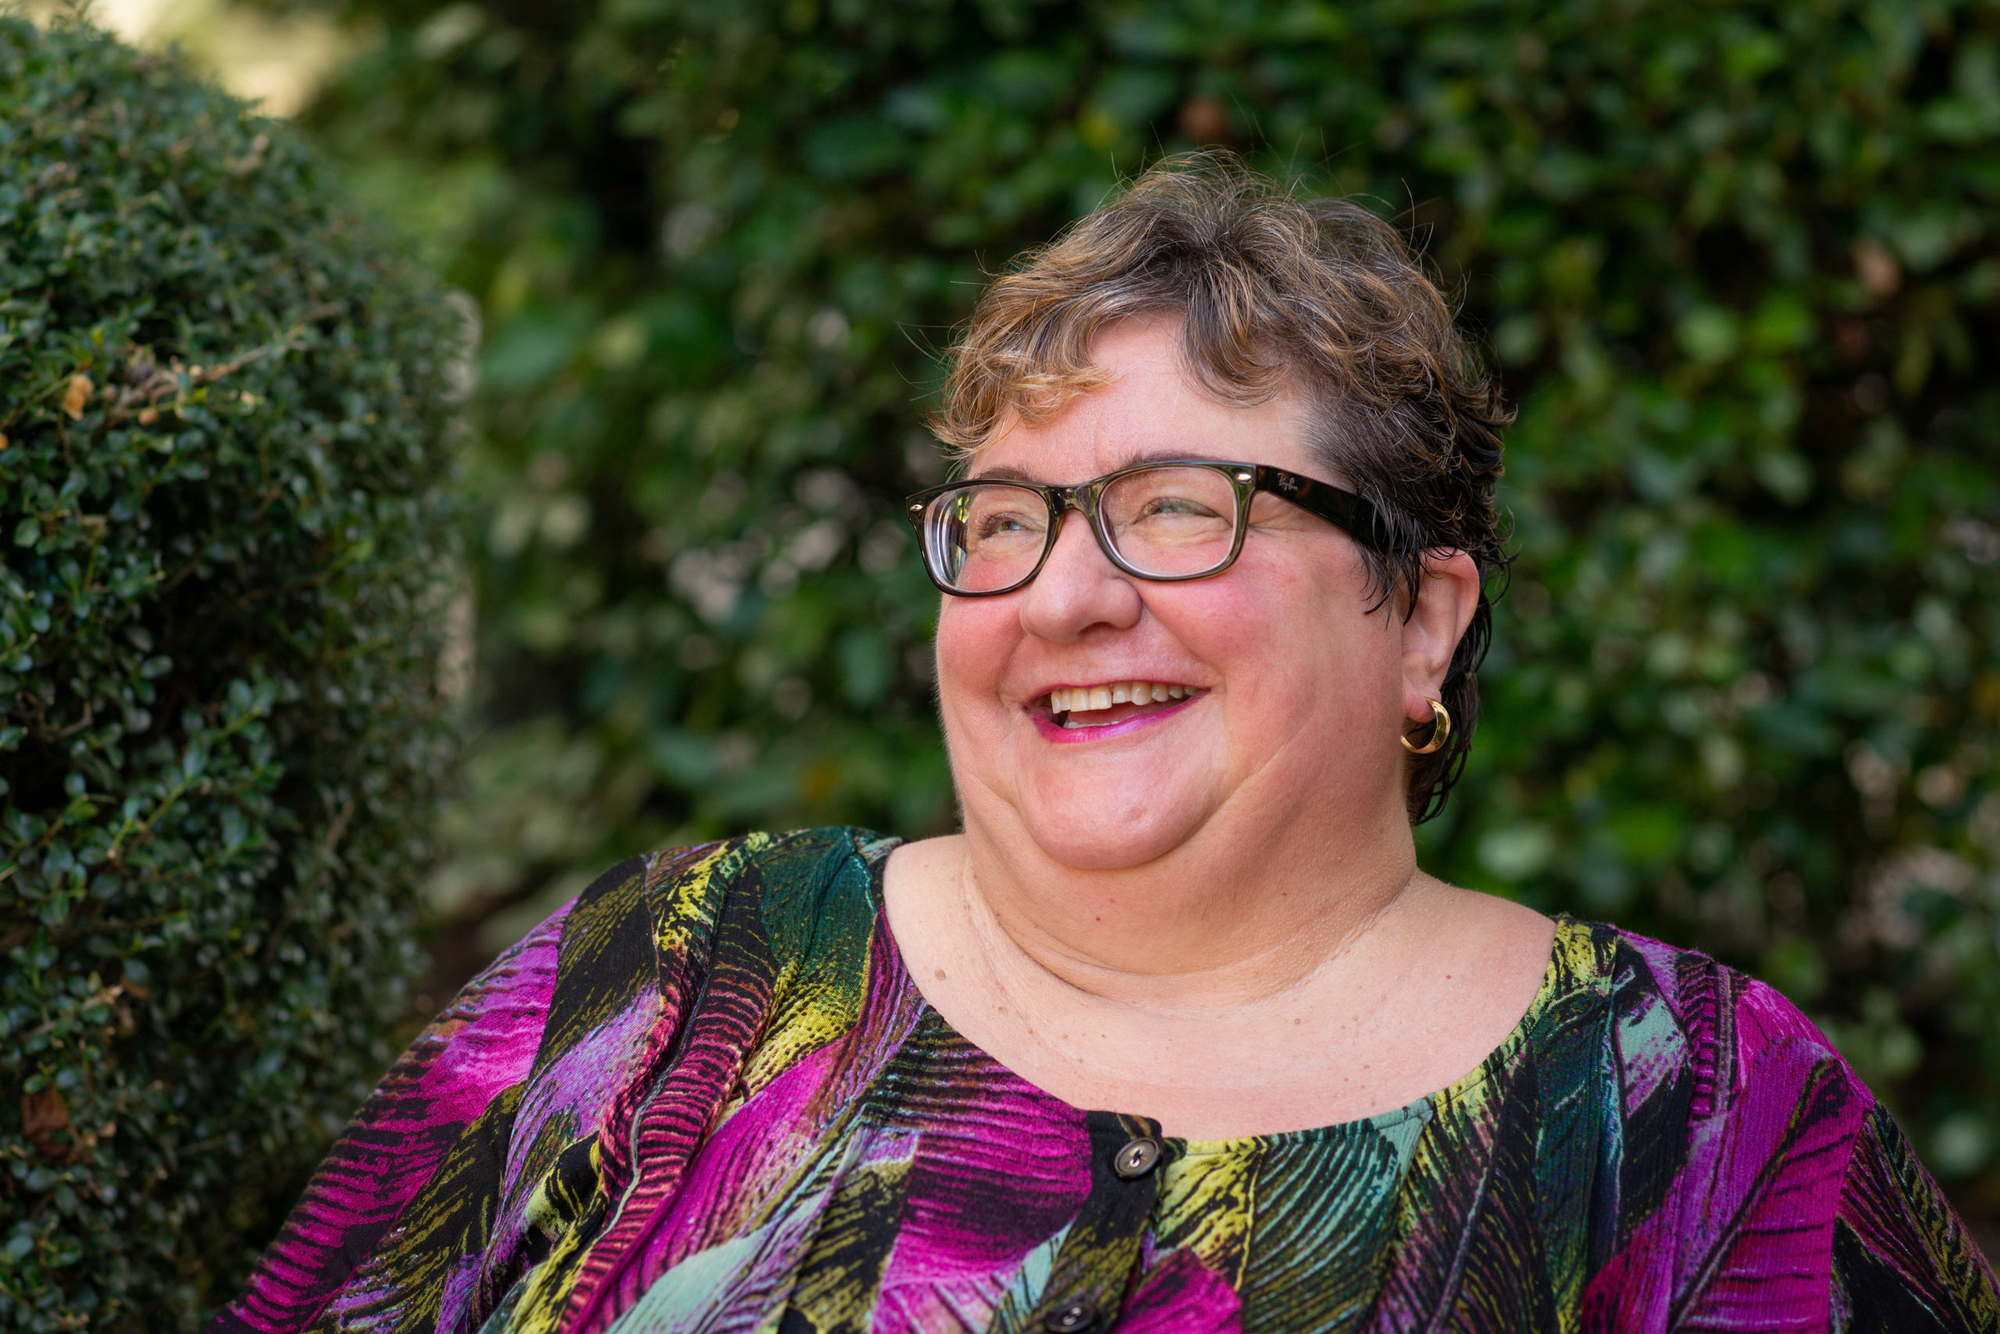  A fat woman laughs during a business headshot photoshoot outdoors in WA